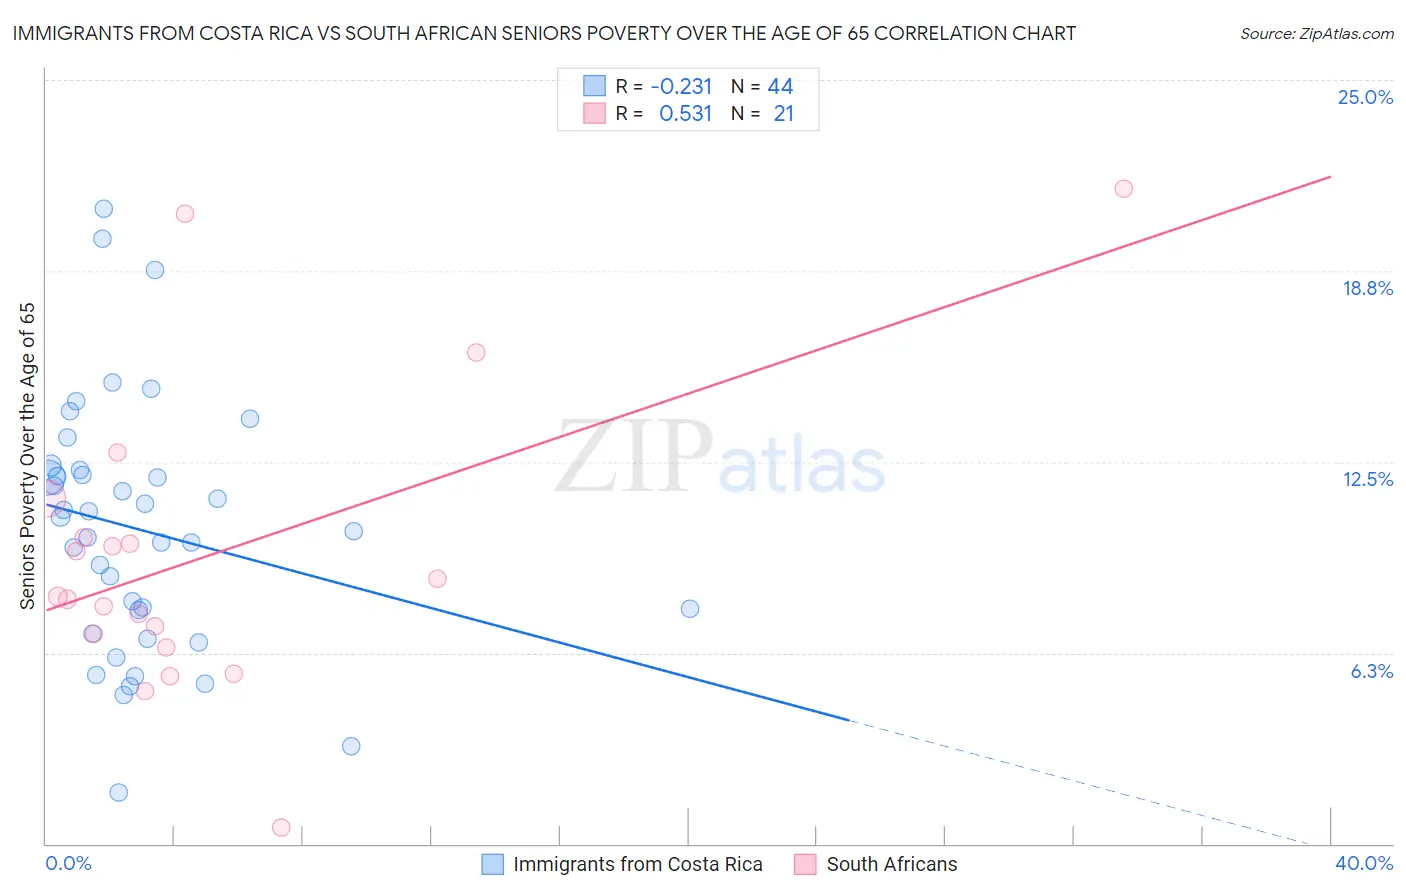 Immigrants from Costa Rica vs South African Seniors Poverty Over the Age of 65